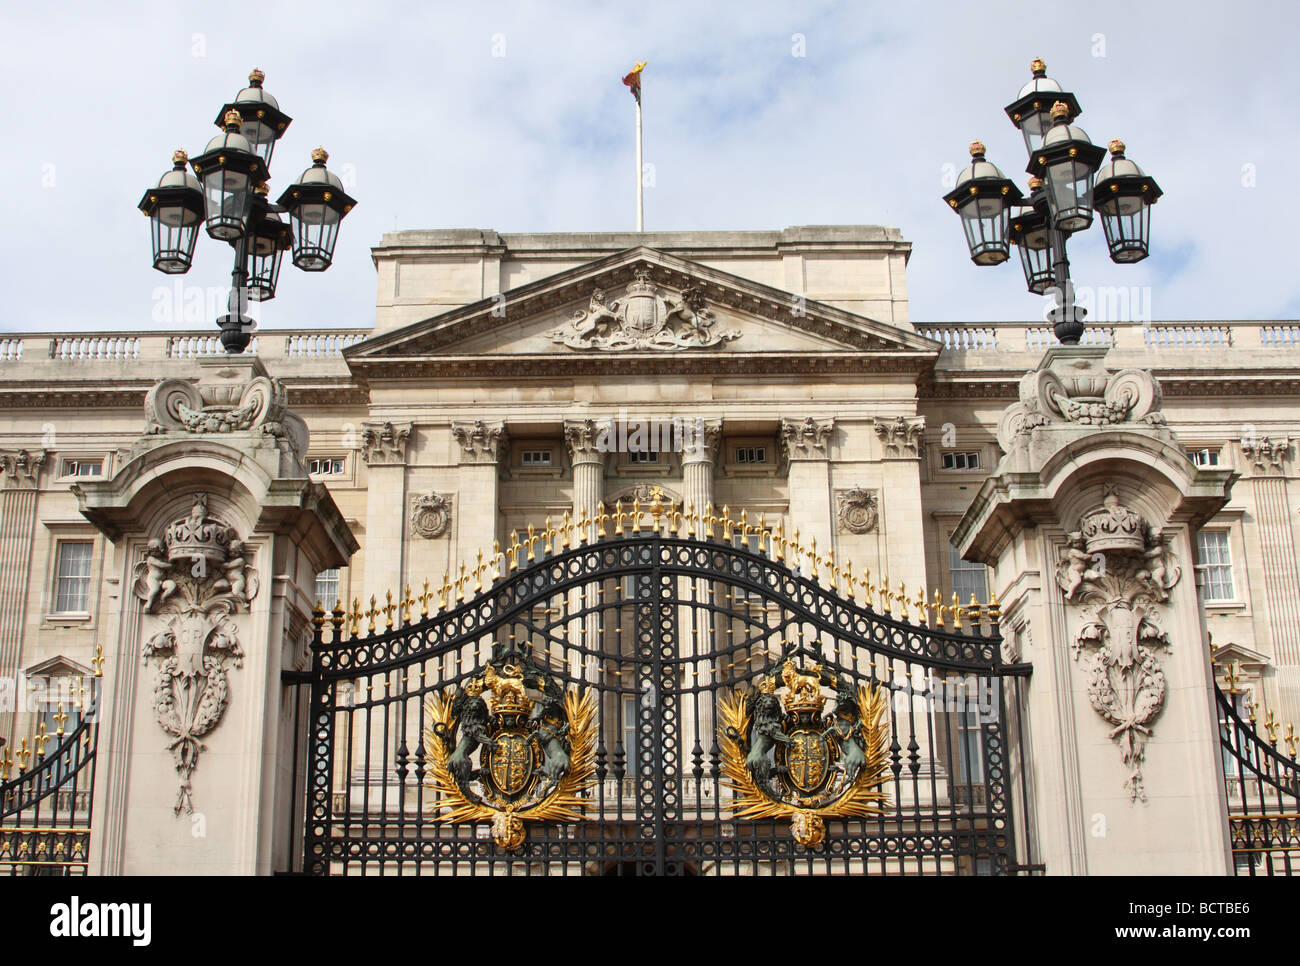 Buckingham Palace, London. The official residence of Queen Elizabeth II with flag flying to signify the monarch is in residence Stock Photo